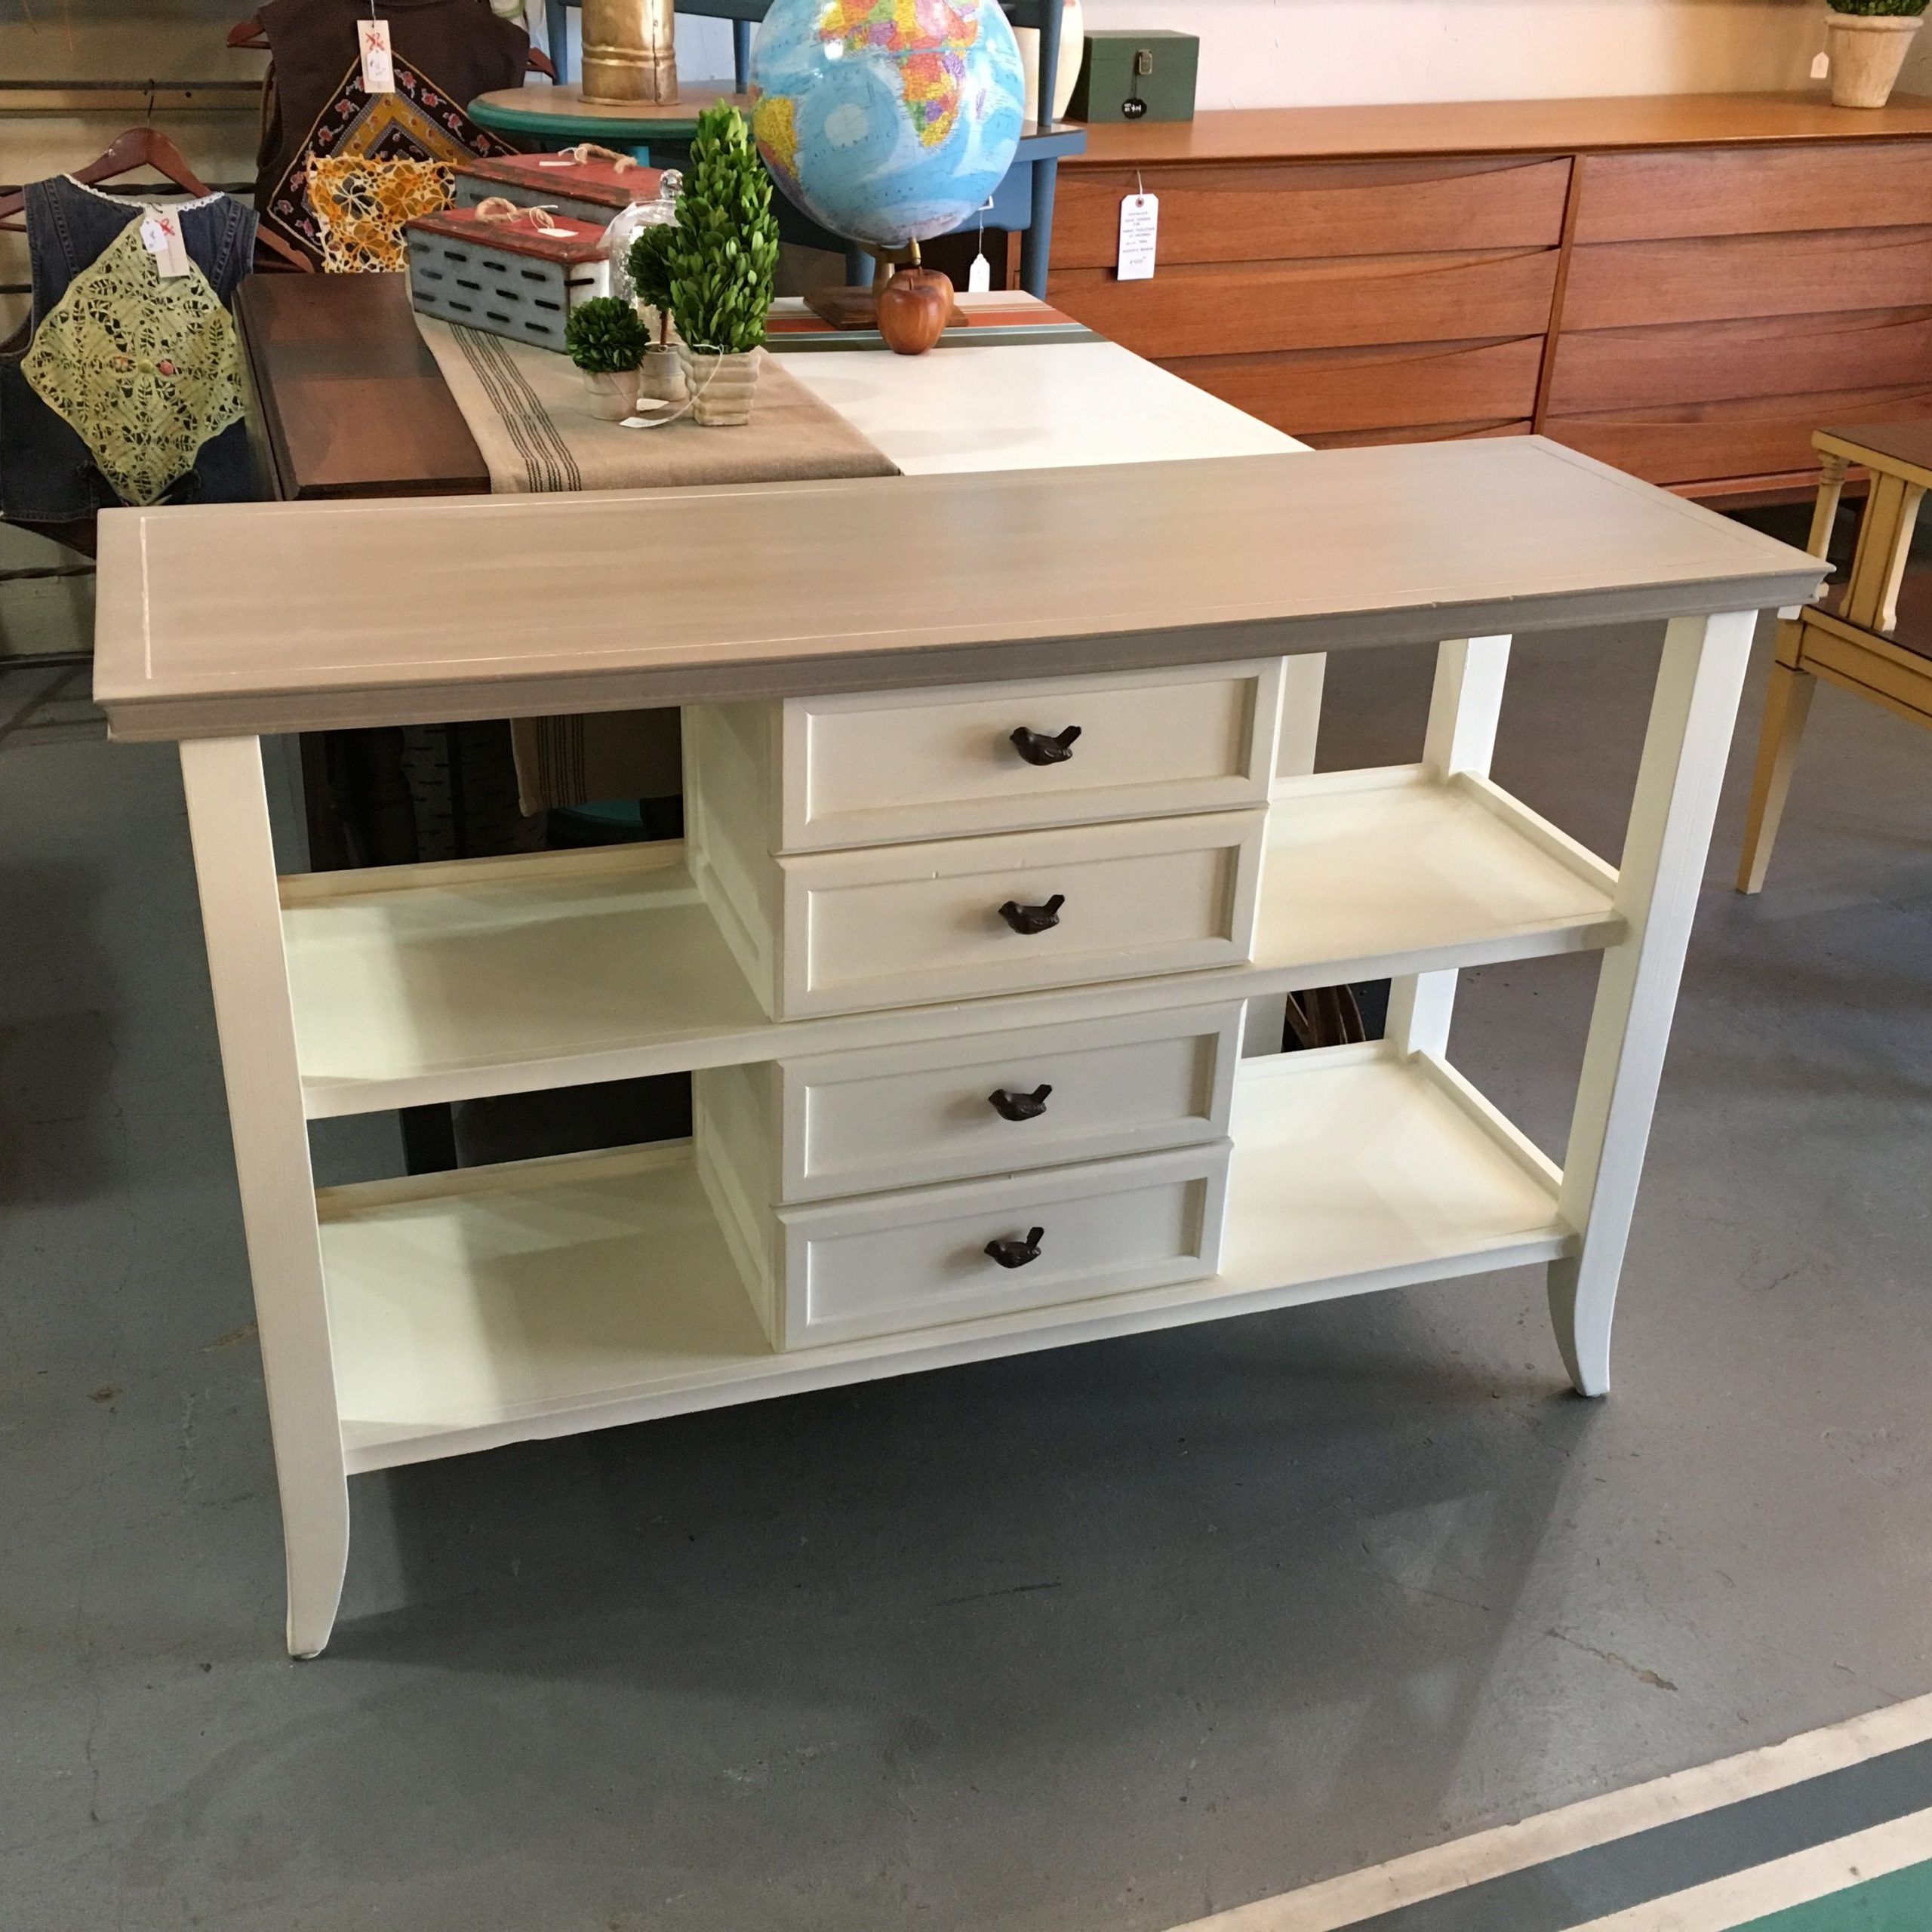 Charming Console Table In Coco Chalk Paint®annie Sloan With A Intended For Oceanside White Washed Console Tables (Gallery 20 of 20)